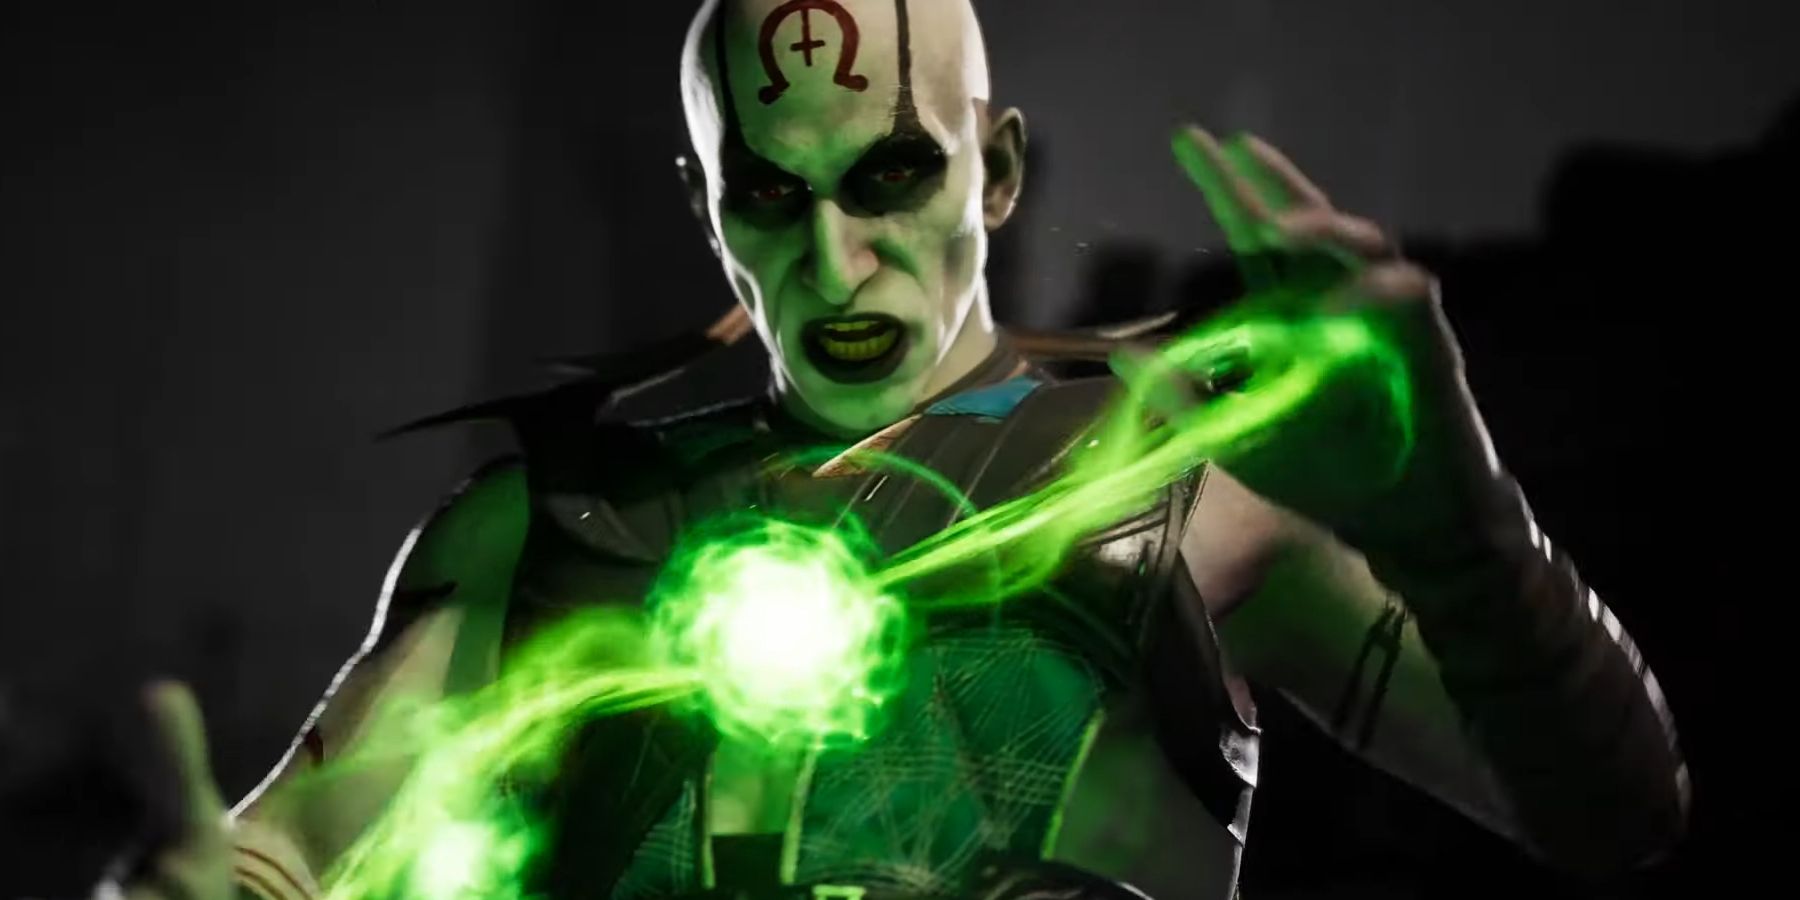 the start of quan chi's second fataltiy in mk1